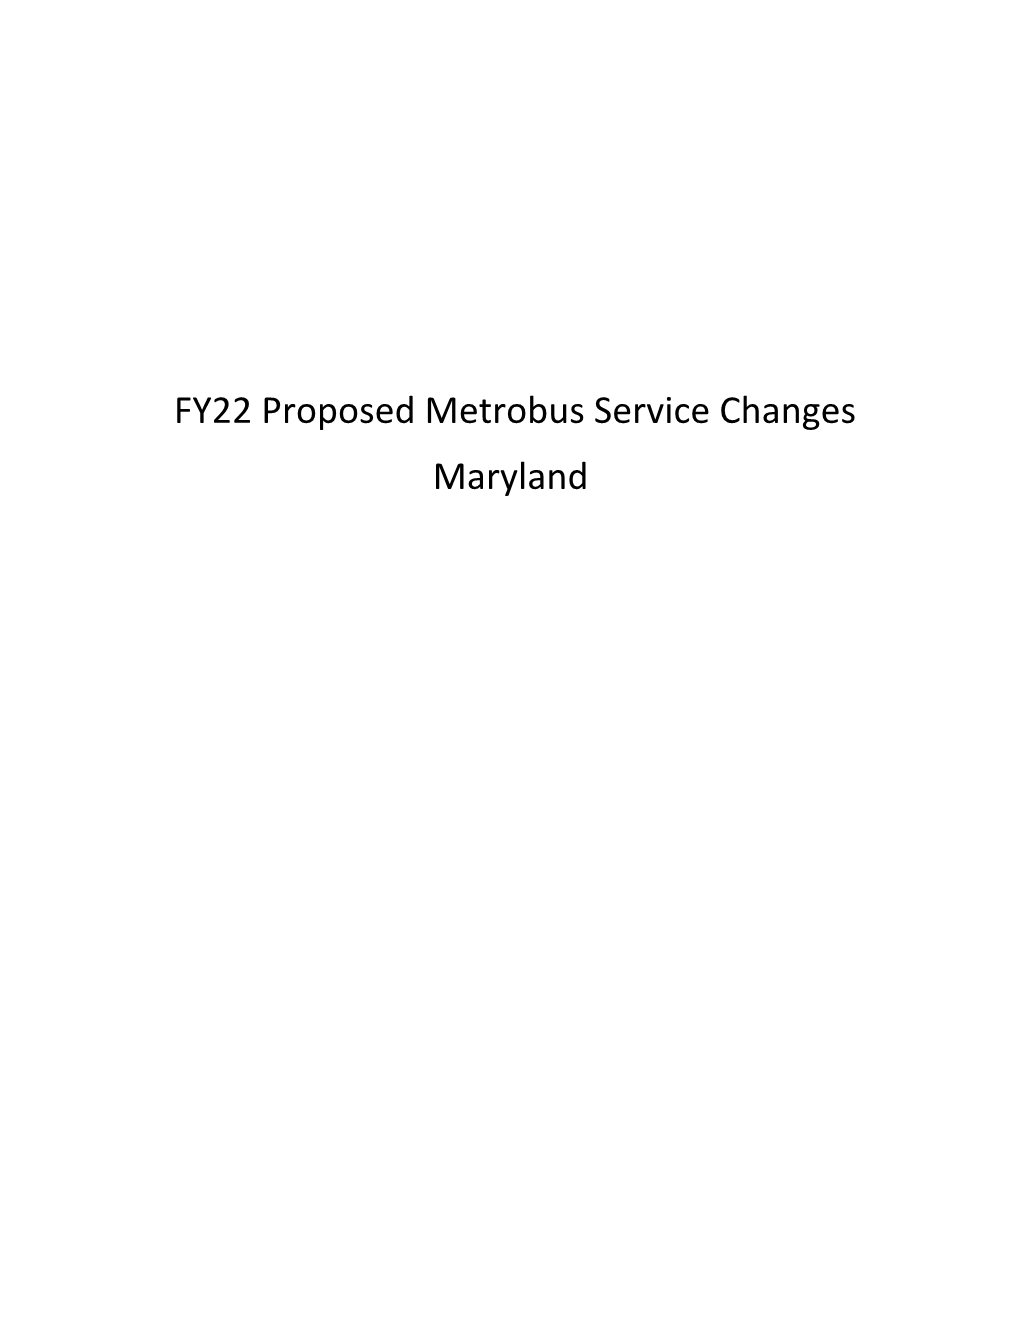 FY22 Proposed Metrobus Service Changes Maryland